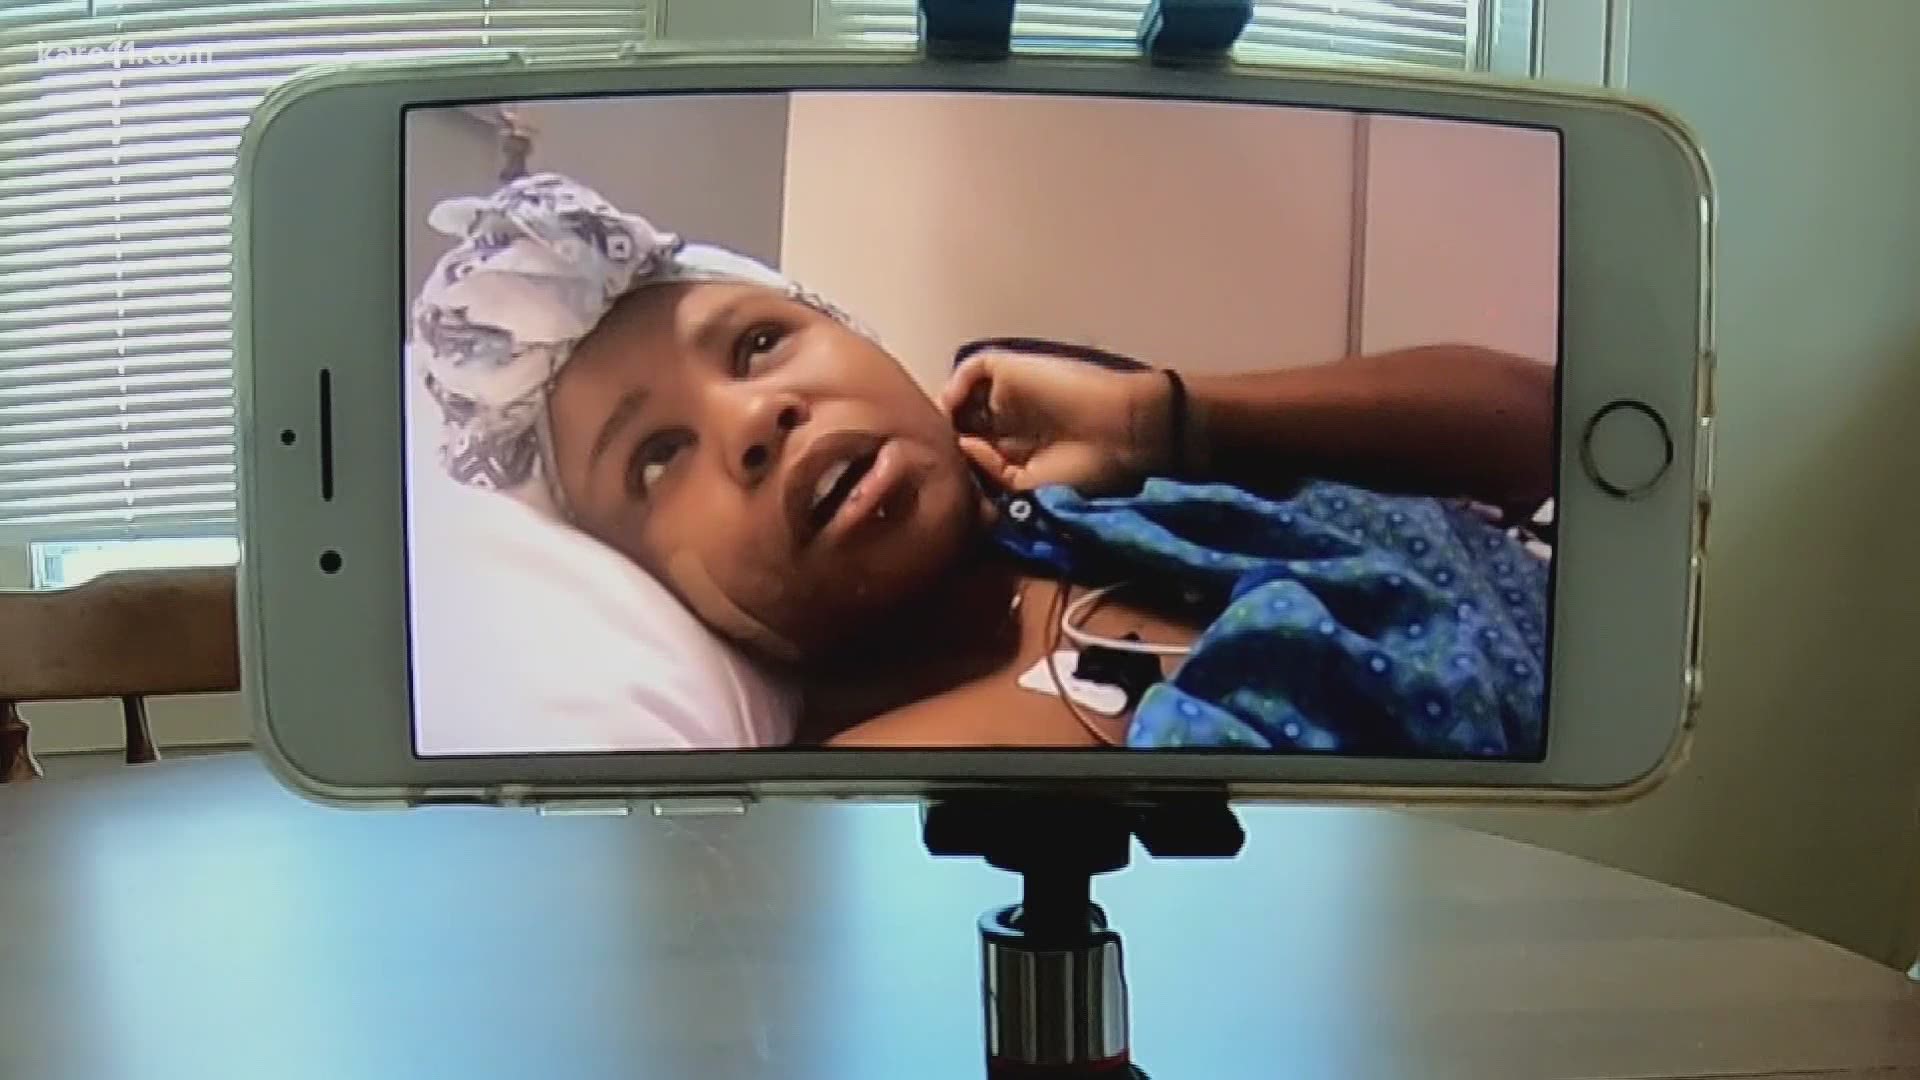 We're hearing from one of the eleven victims of violence in Uptown as she starts the long road to recovery.